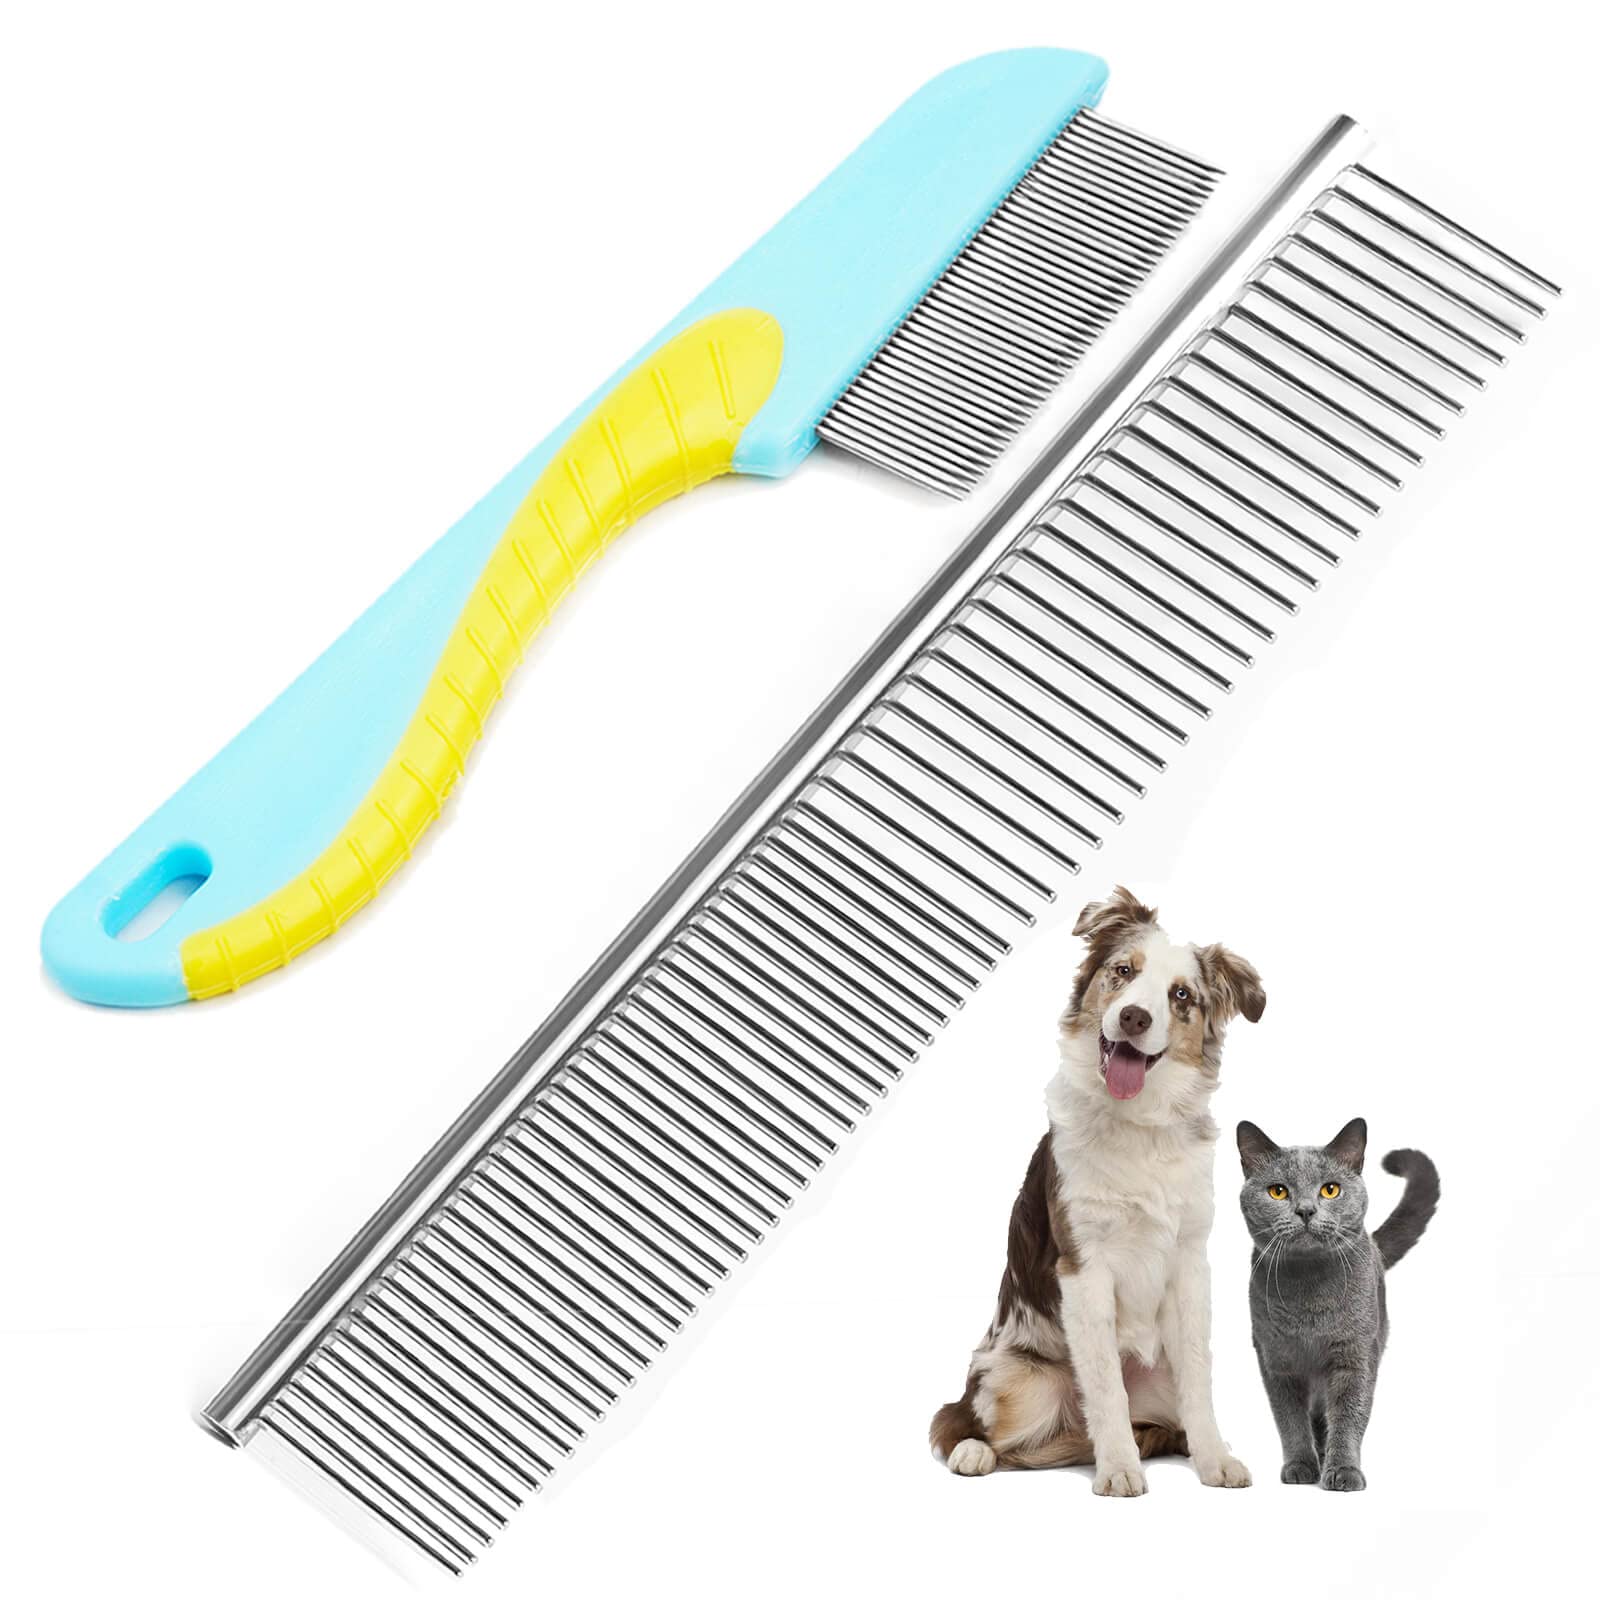 Dog Combs: Keeping Your Canine Companion Looking and Feeling Their Best插图